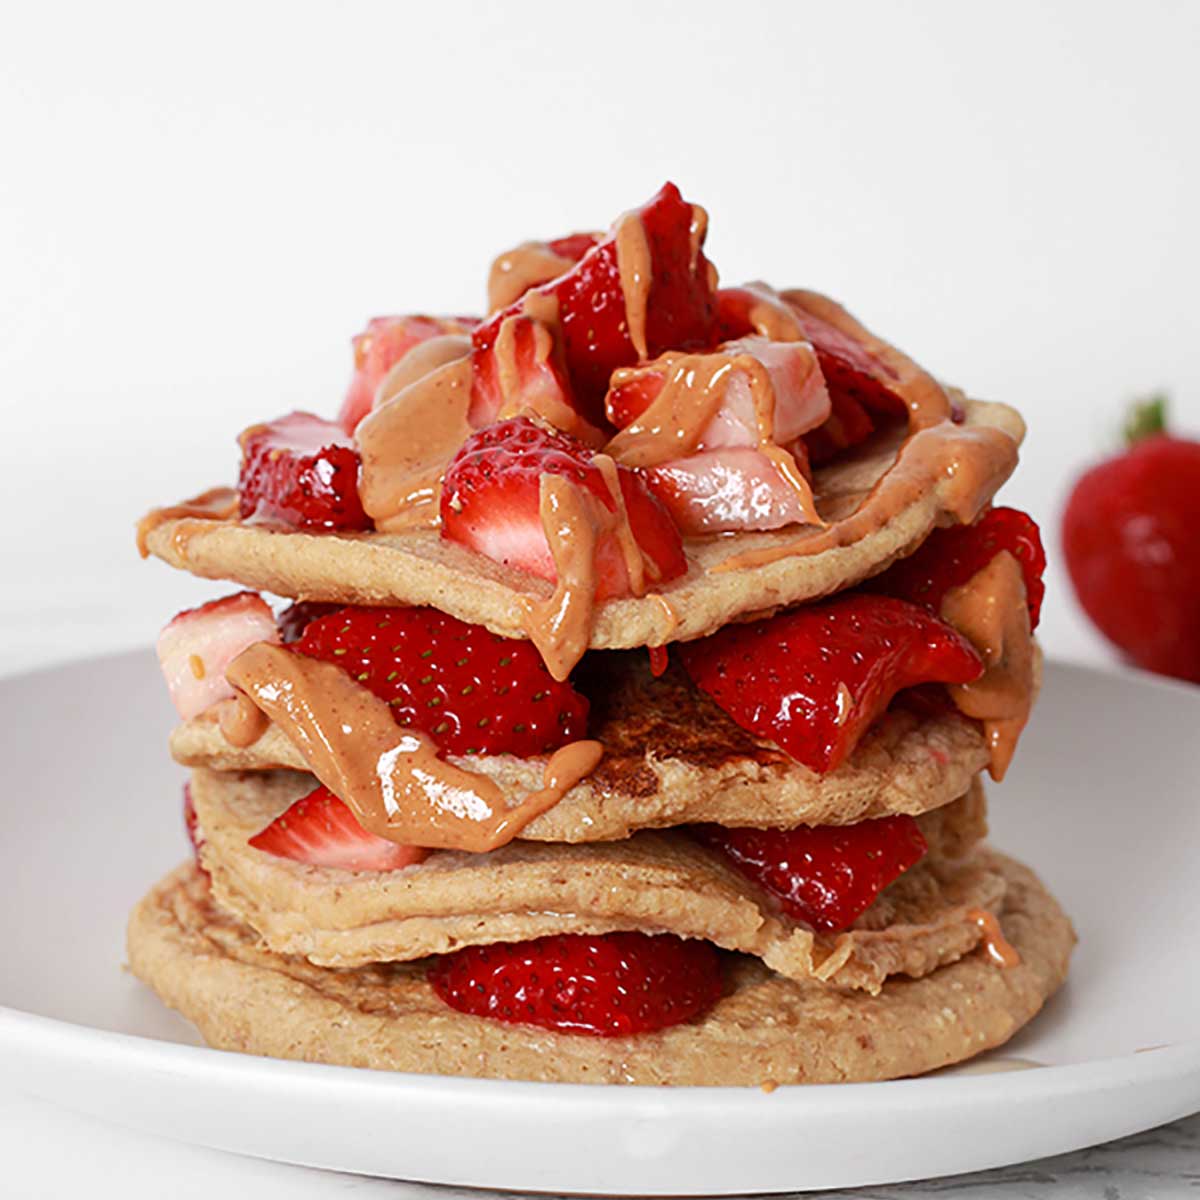 Stack Of Vegan Pancakes With Strawberries And Peanut Butter2